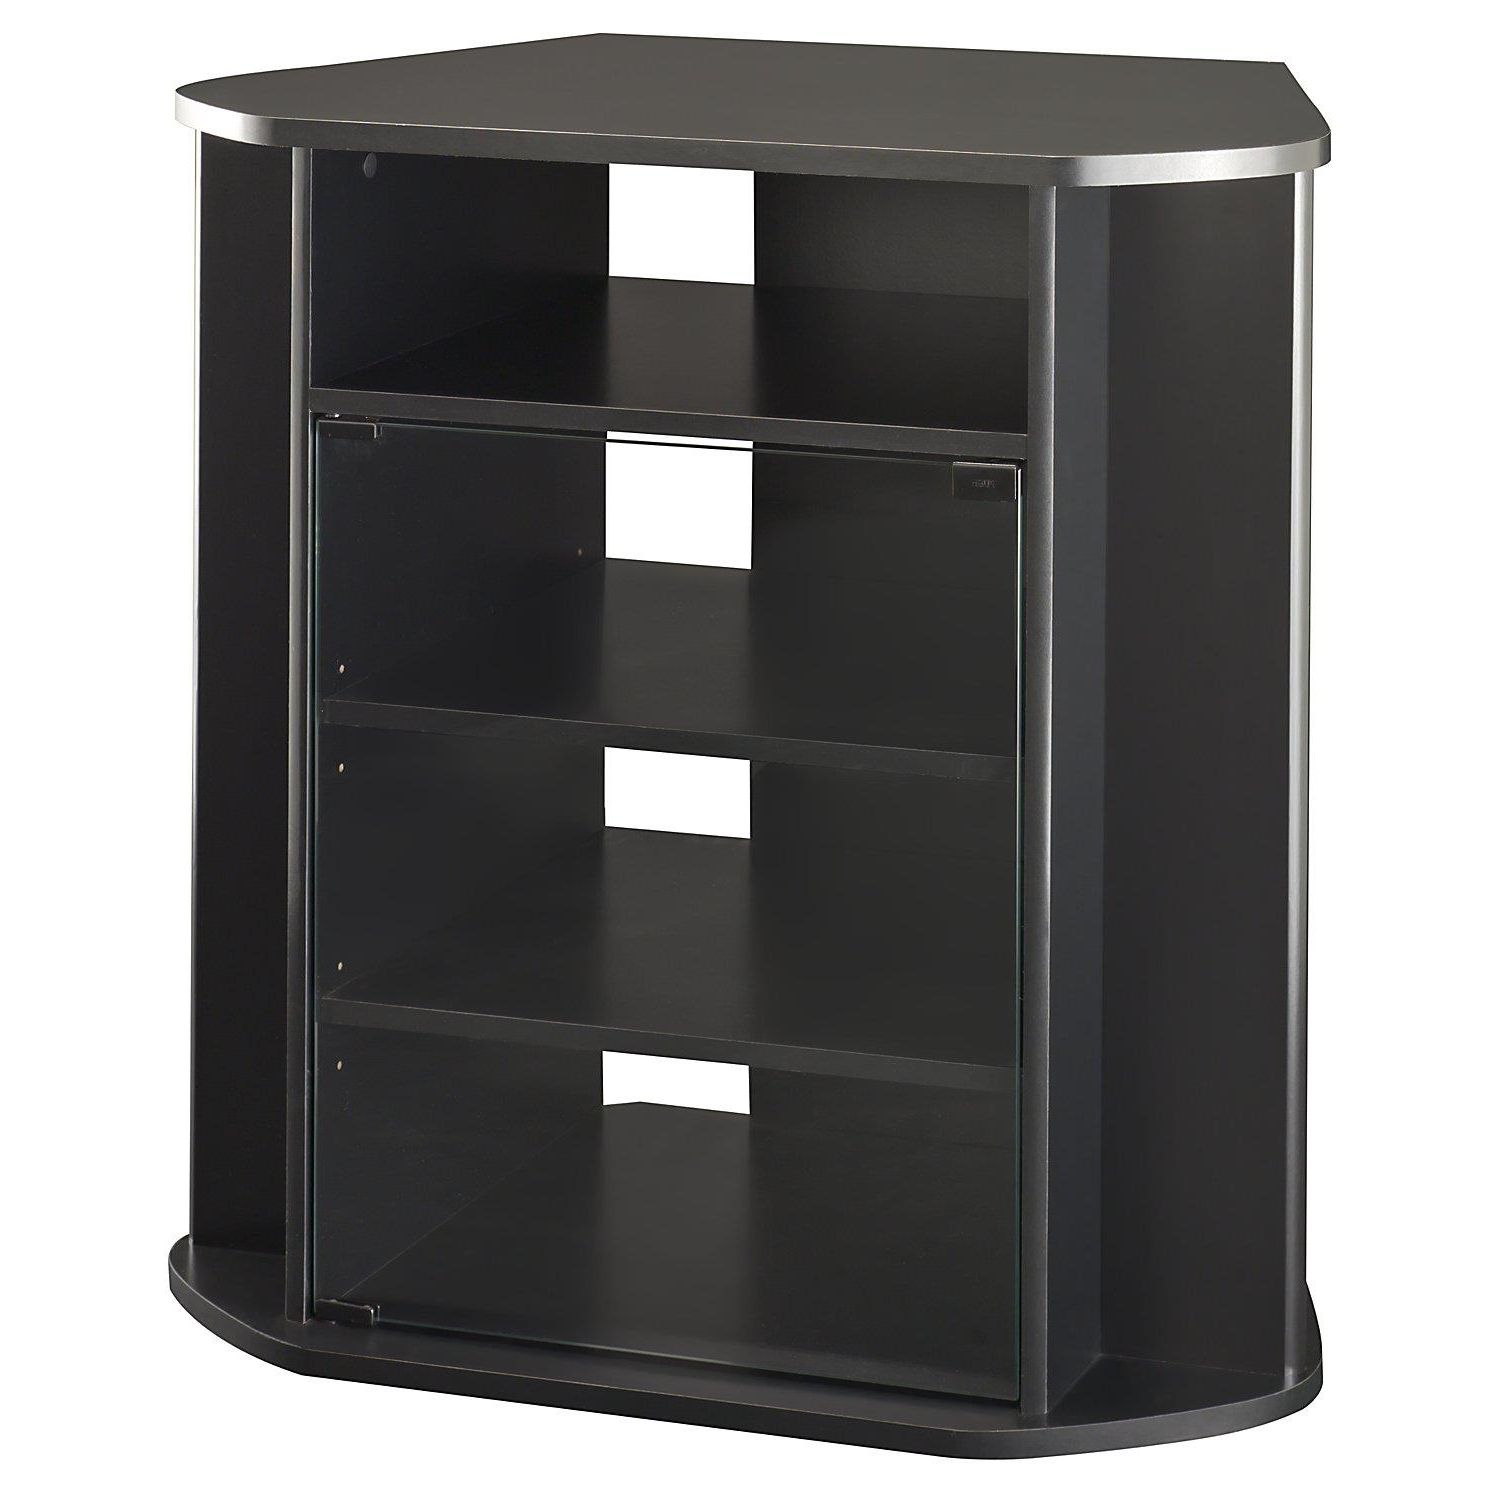 Tall Black Corner Tv Cabinet With Glass Doors And Four Shelves Of For Latest Corner Tv Cabinets With Glass Doors (View 14 of 20)